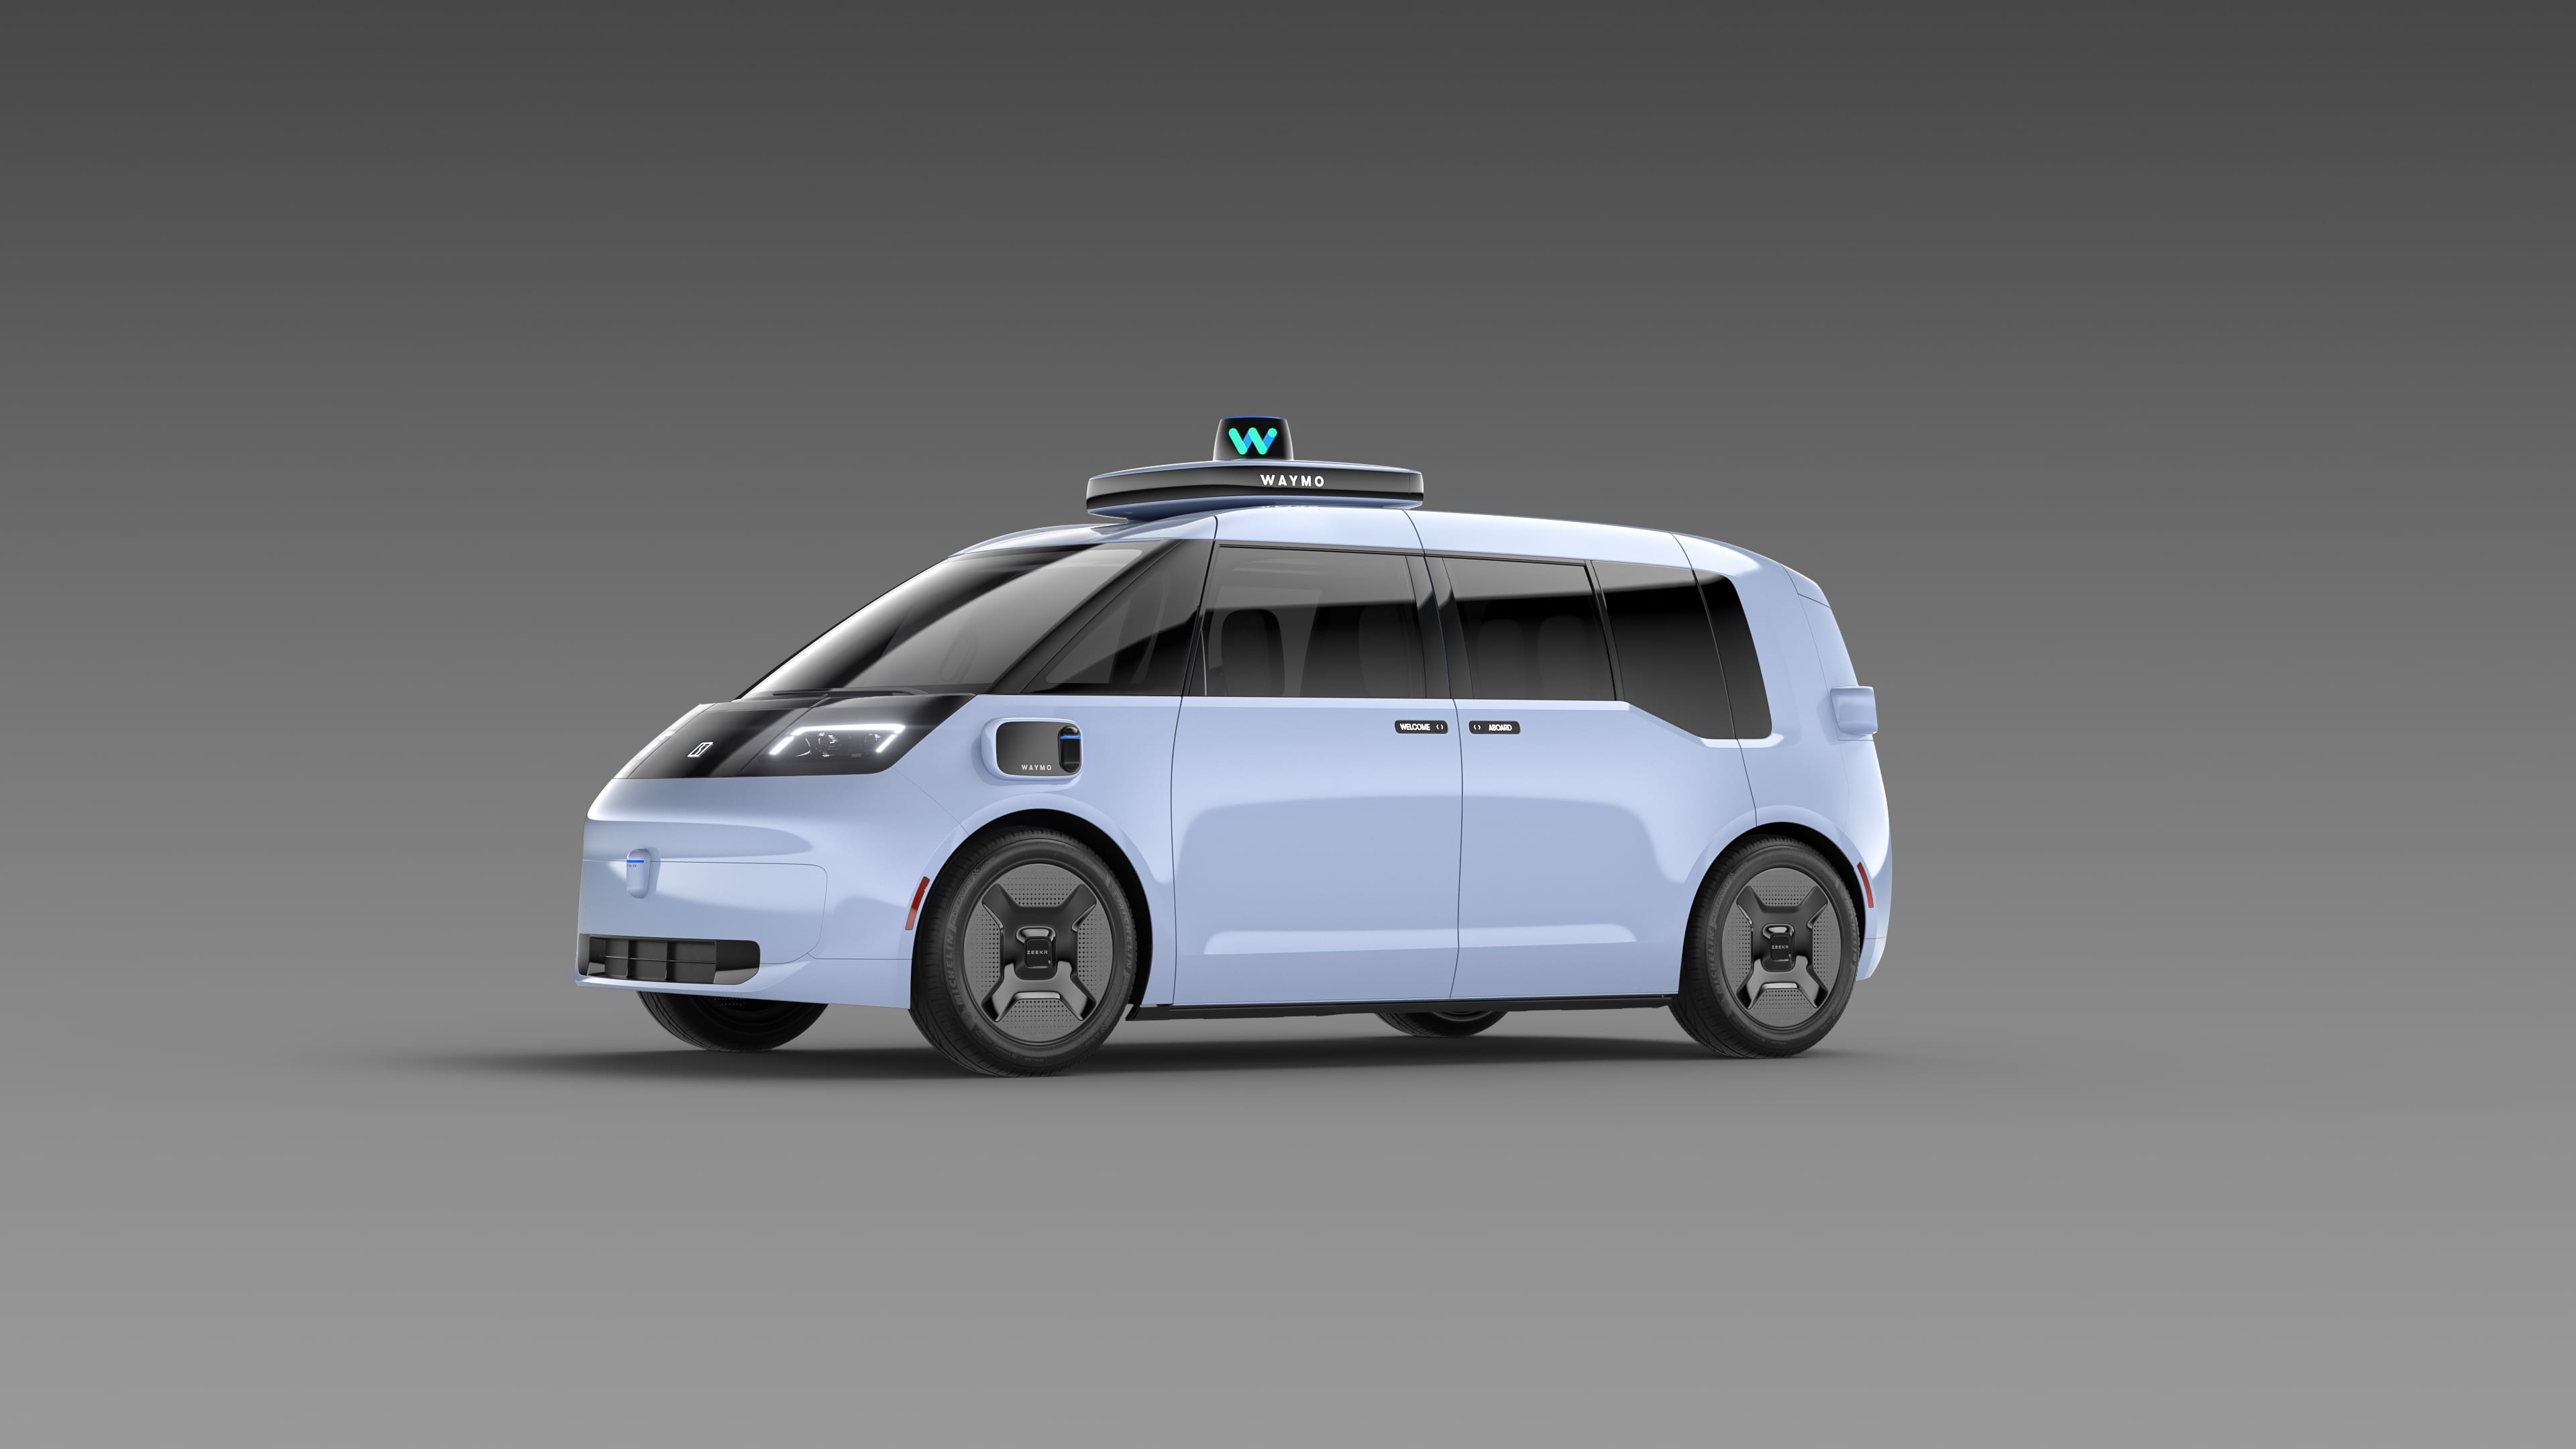 Exterior of Waymo's rider-first, autonomous mobility platform designed in partnership with Zeekr